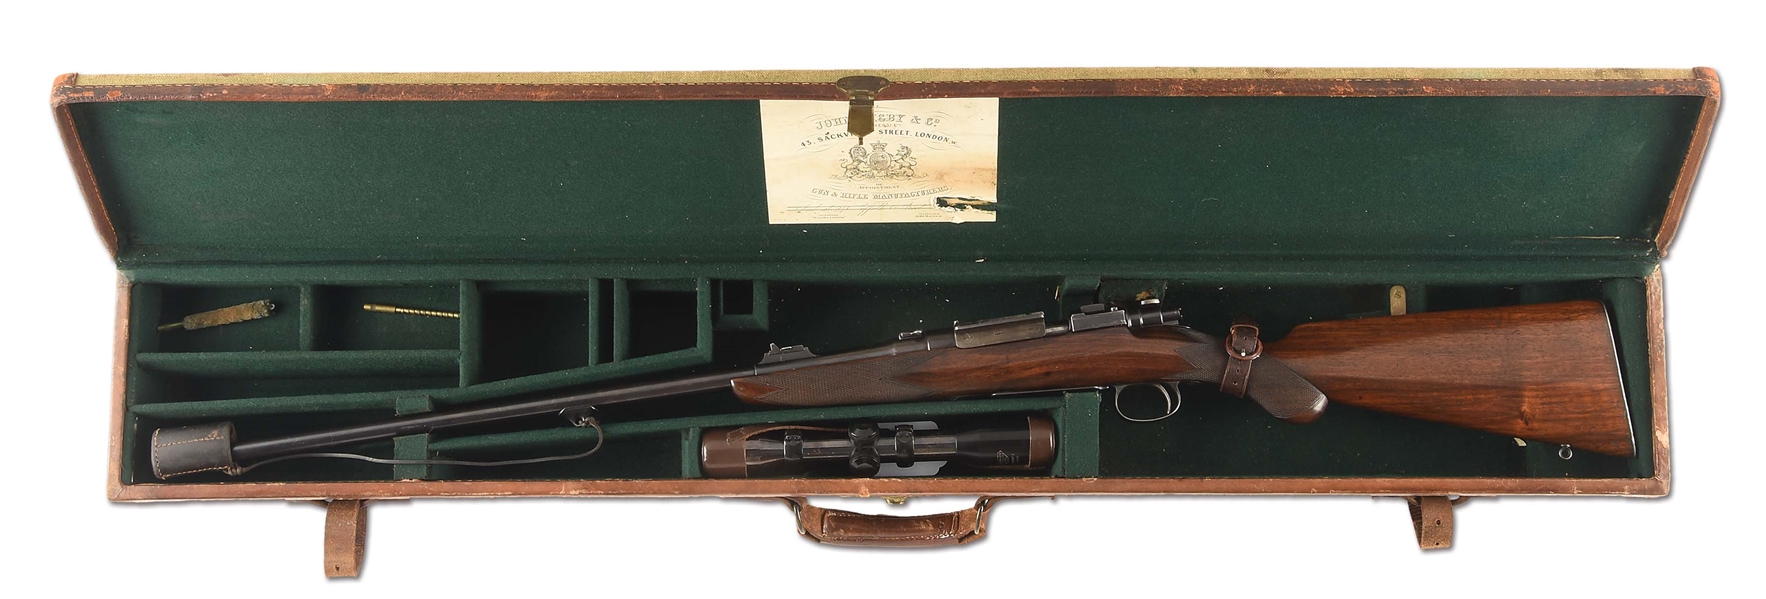 (A) JOHN RIGBY MAUSER .275 HV (7MM MAUSER) BOLT ACTION RIFLE WITH SCOPE AND CASE.